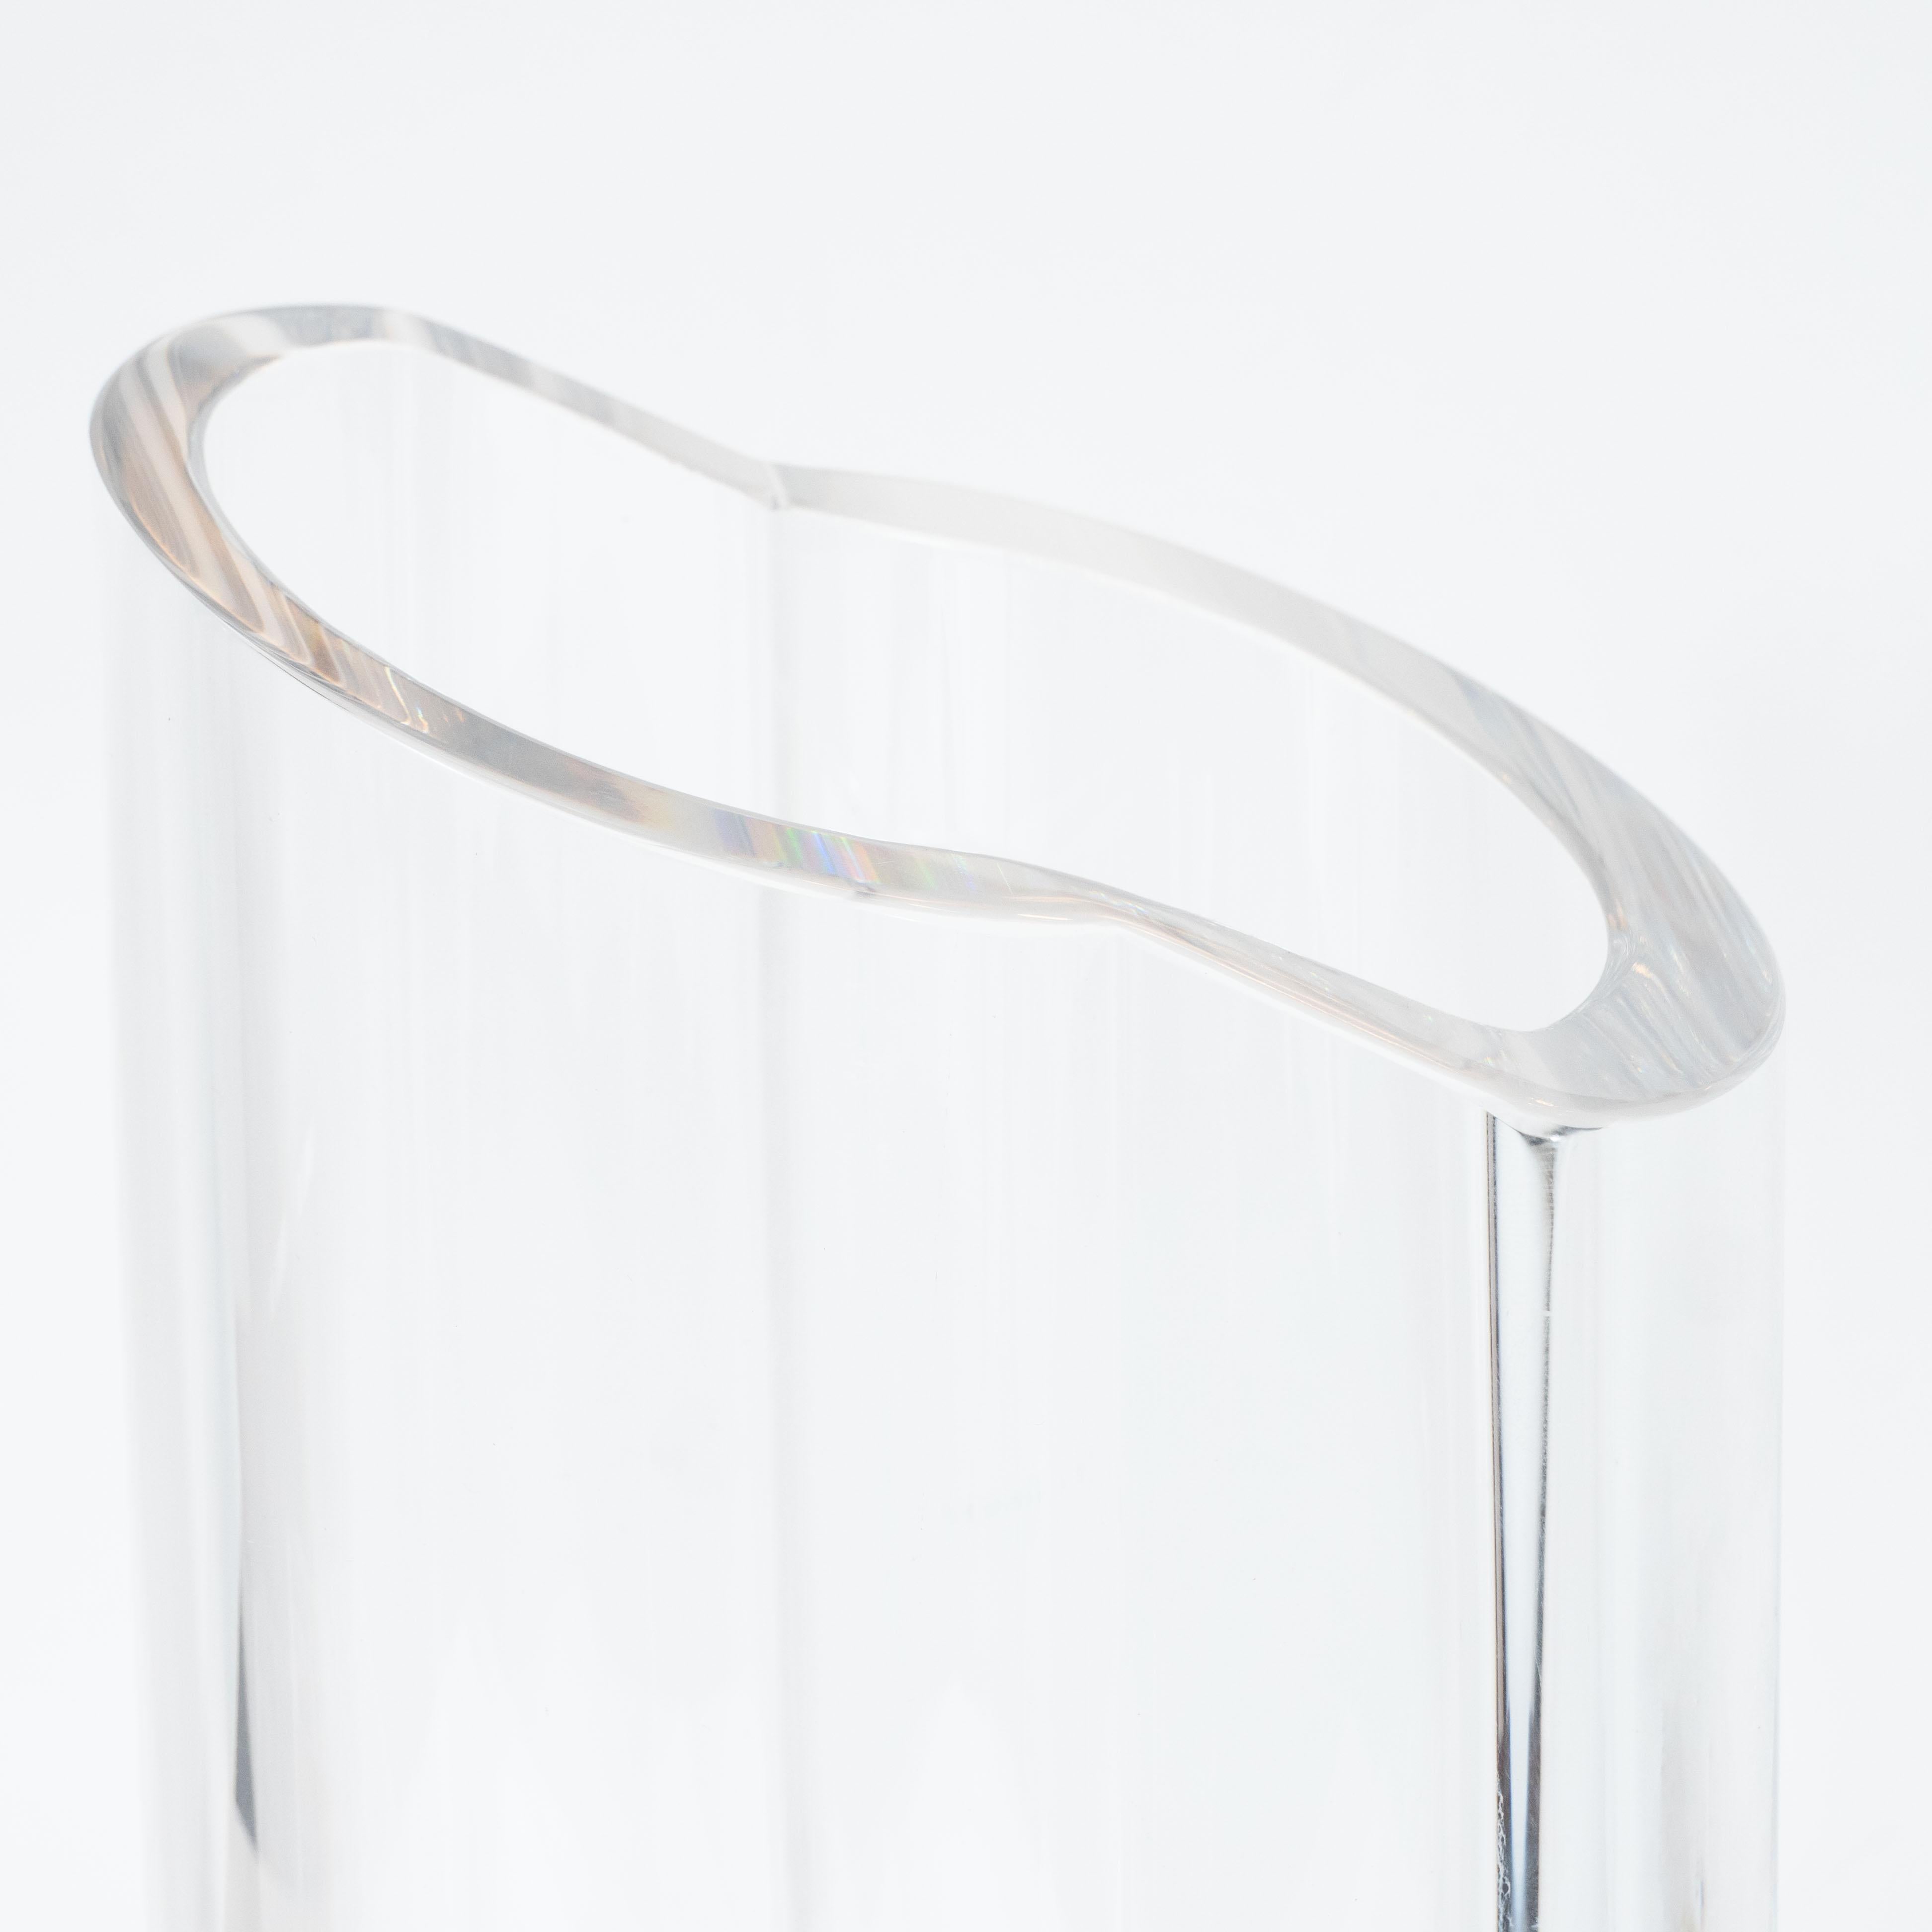 Mid-20th Century Scandinavian Mid-Century Modern Translucent Glass Vase by Orrefors For Sale